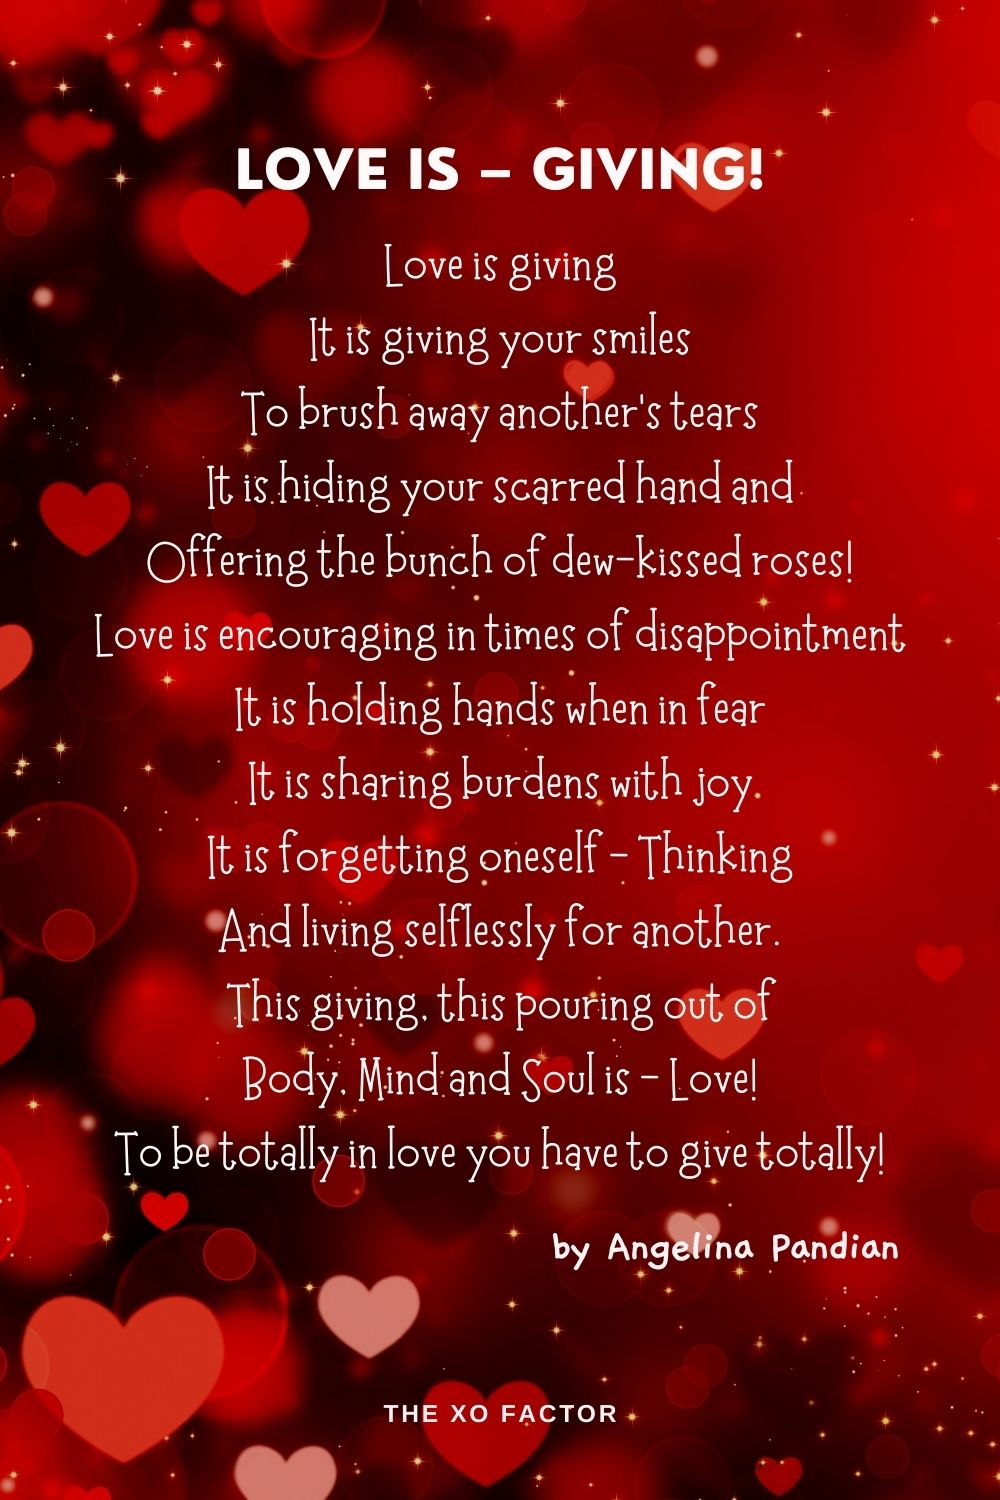 Love Is – Giving! Poem by Angelina Pandian